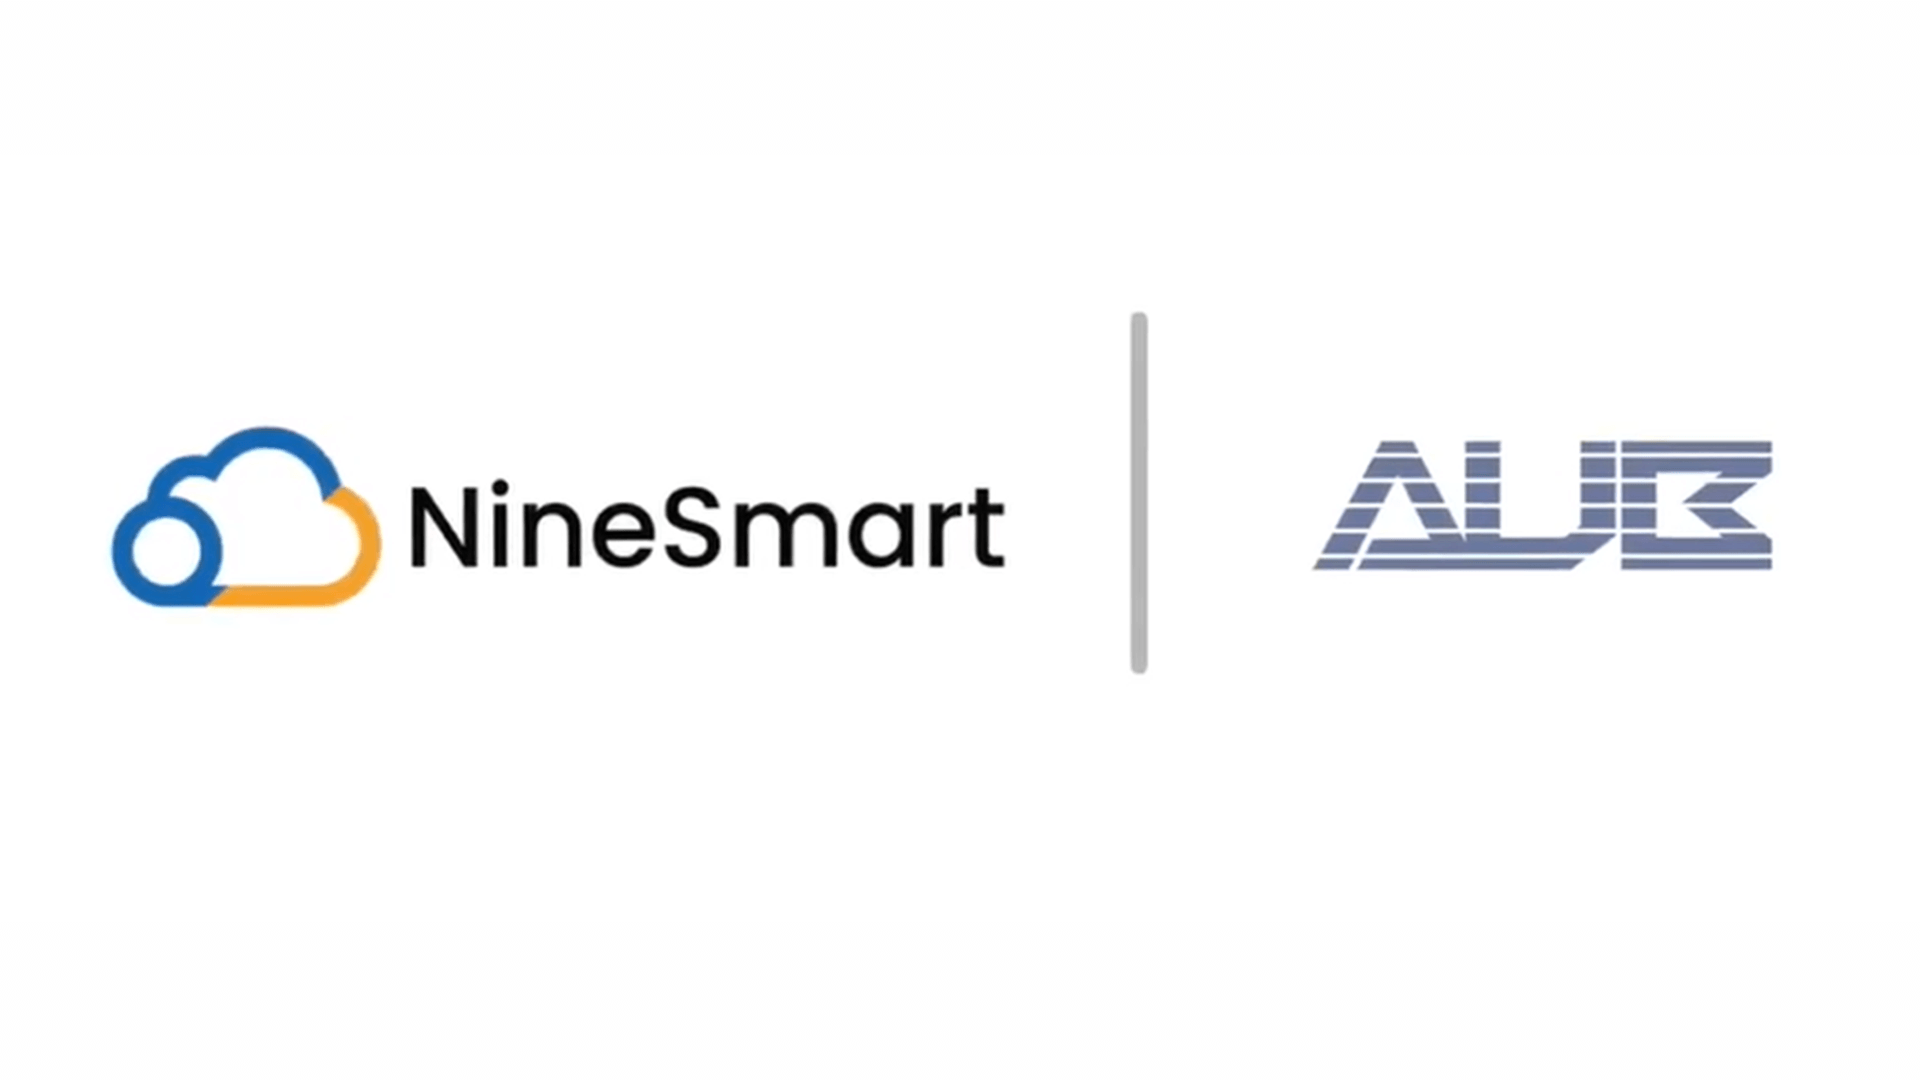 NineSmart and AUB Collaborate to Create a New Self-Service Access ...